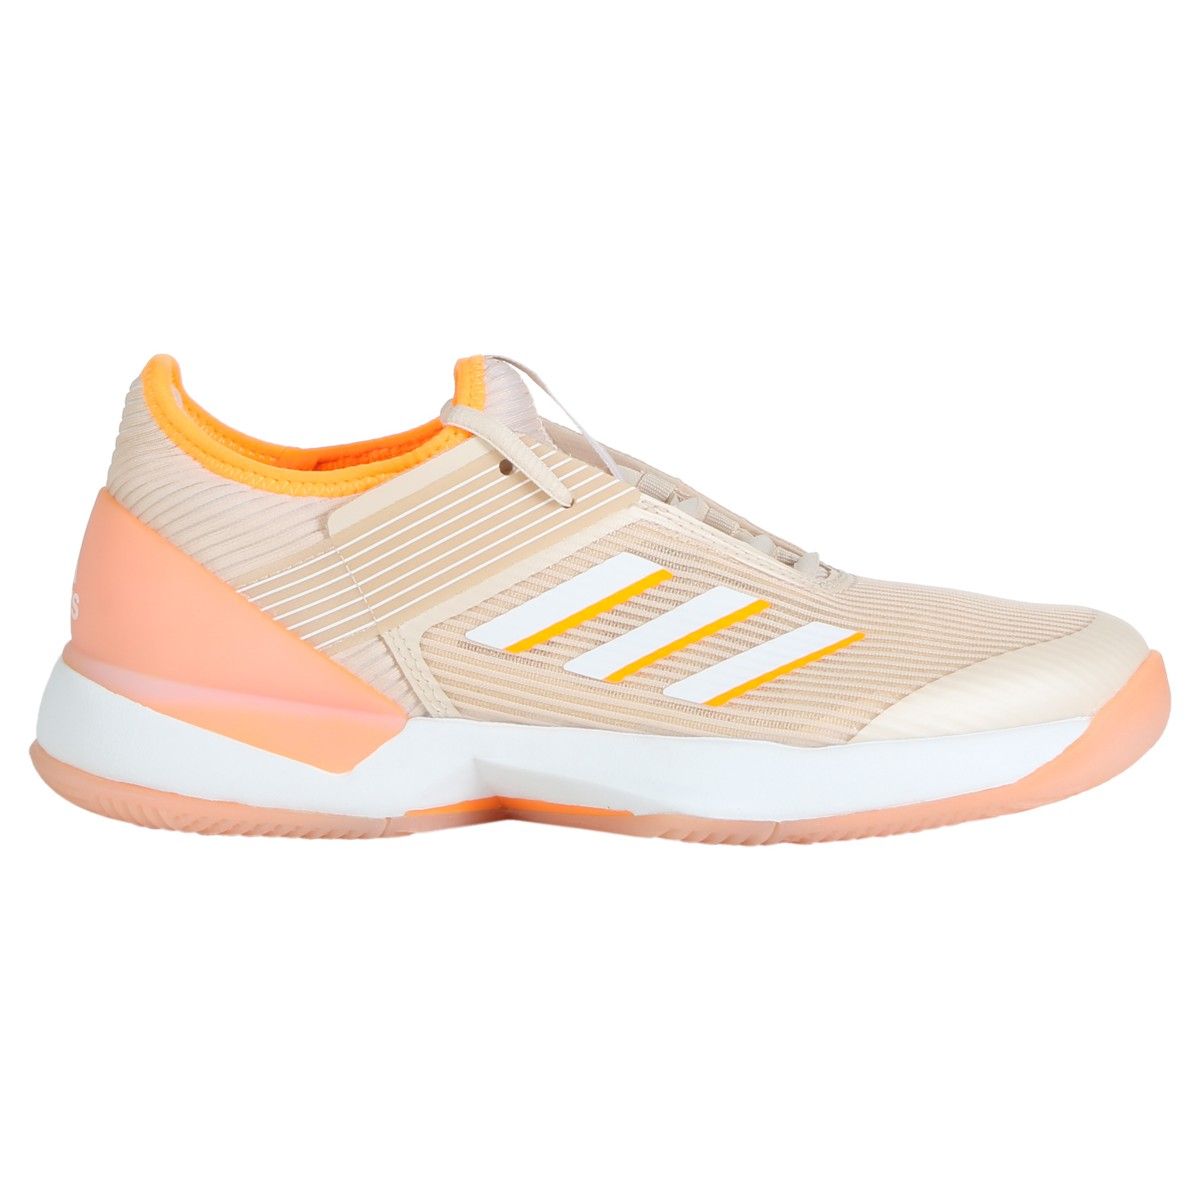 chaussures pour femme adidas